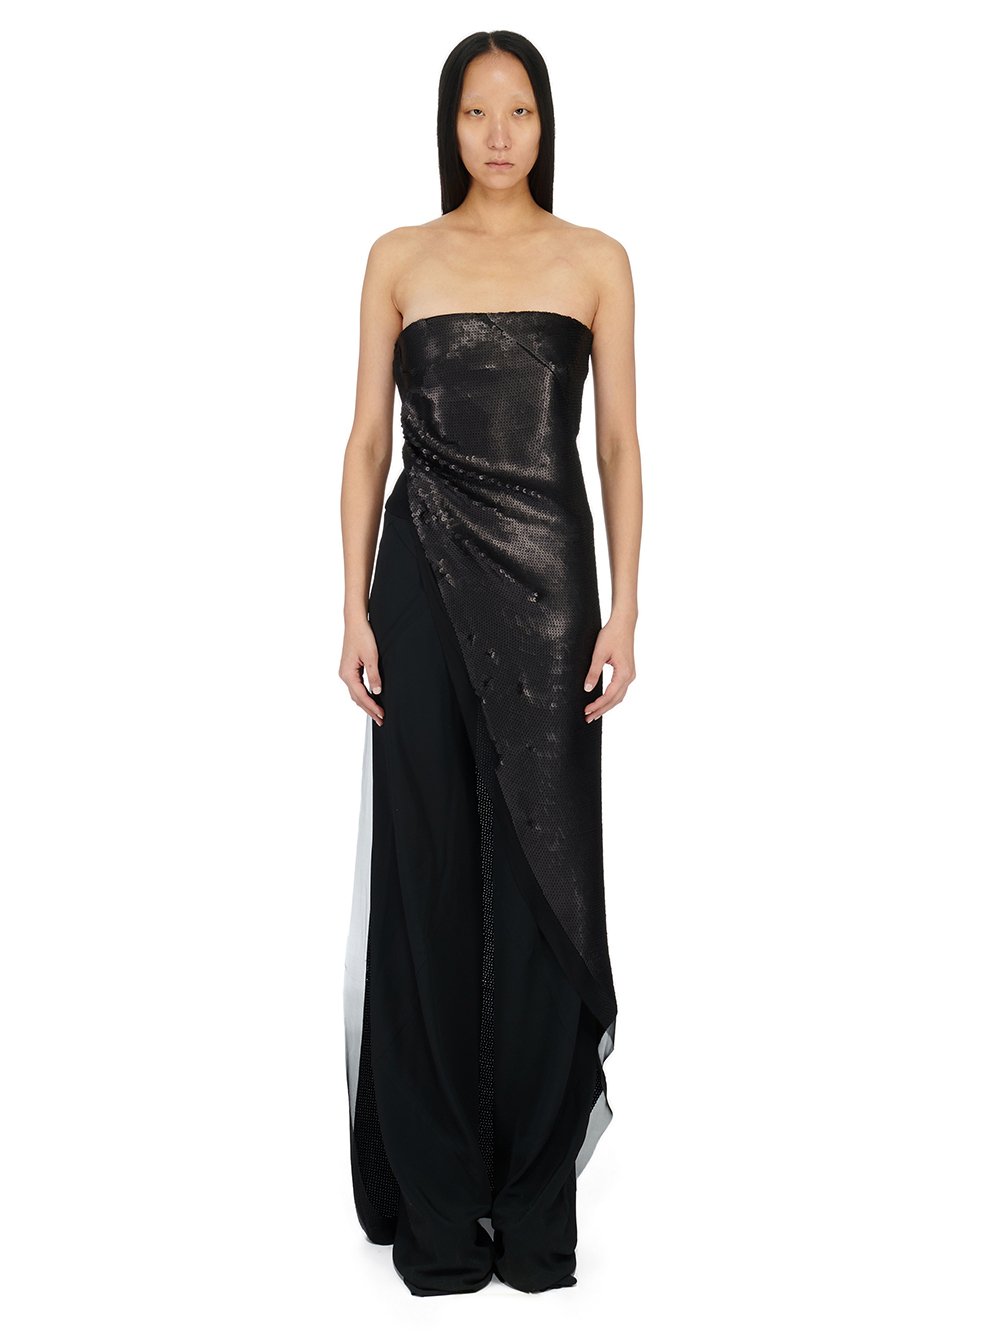 RICK OWENS FW23 LUXOR LONG TOP IN BLACK SEQUIN EMBROIDERED SILK CHIFFON